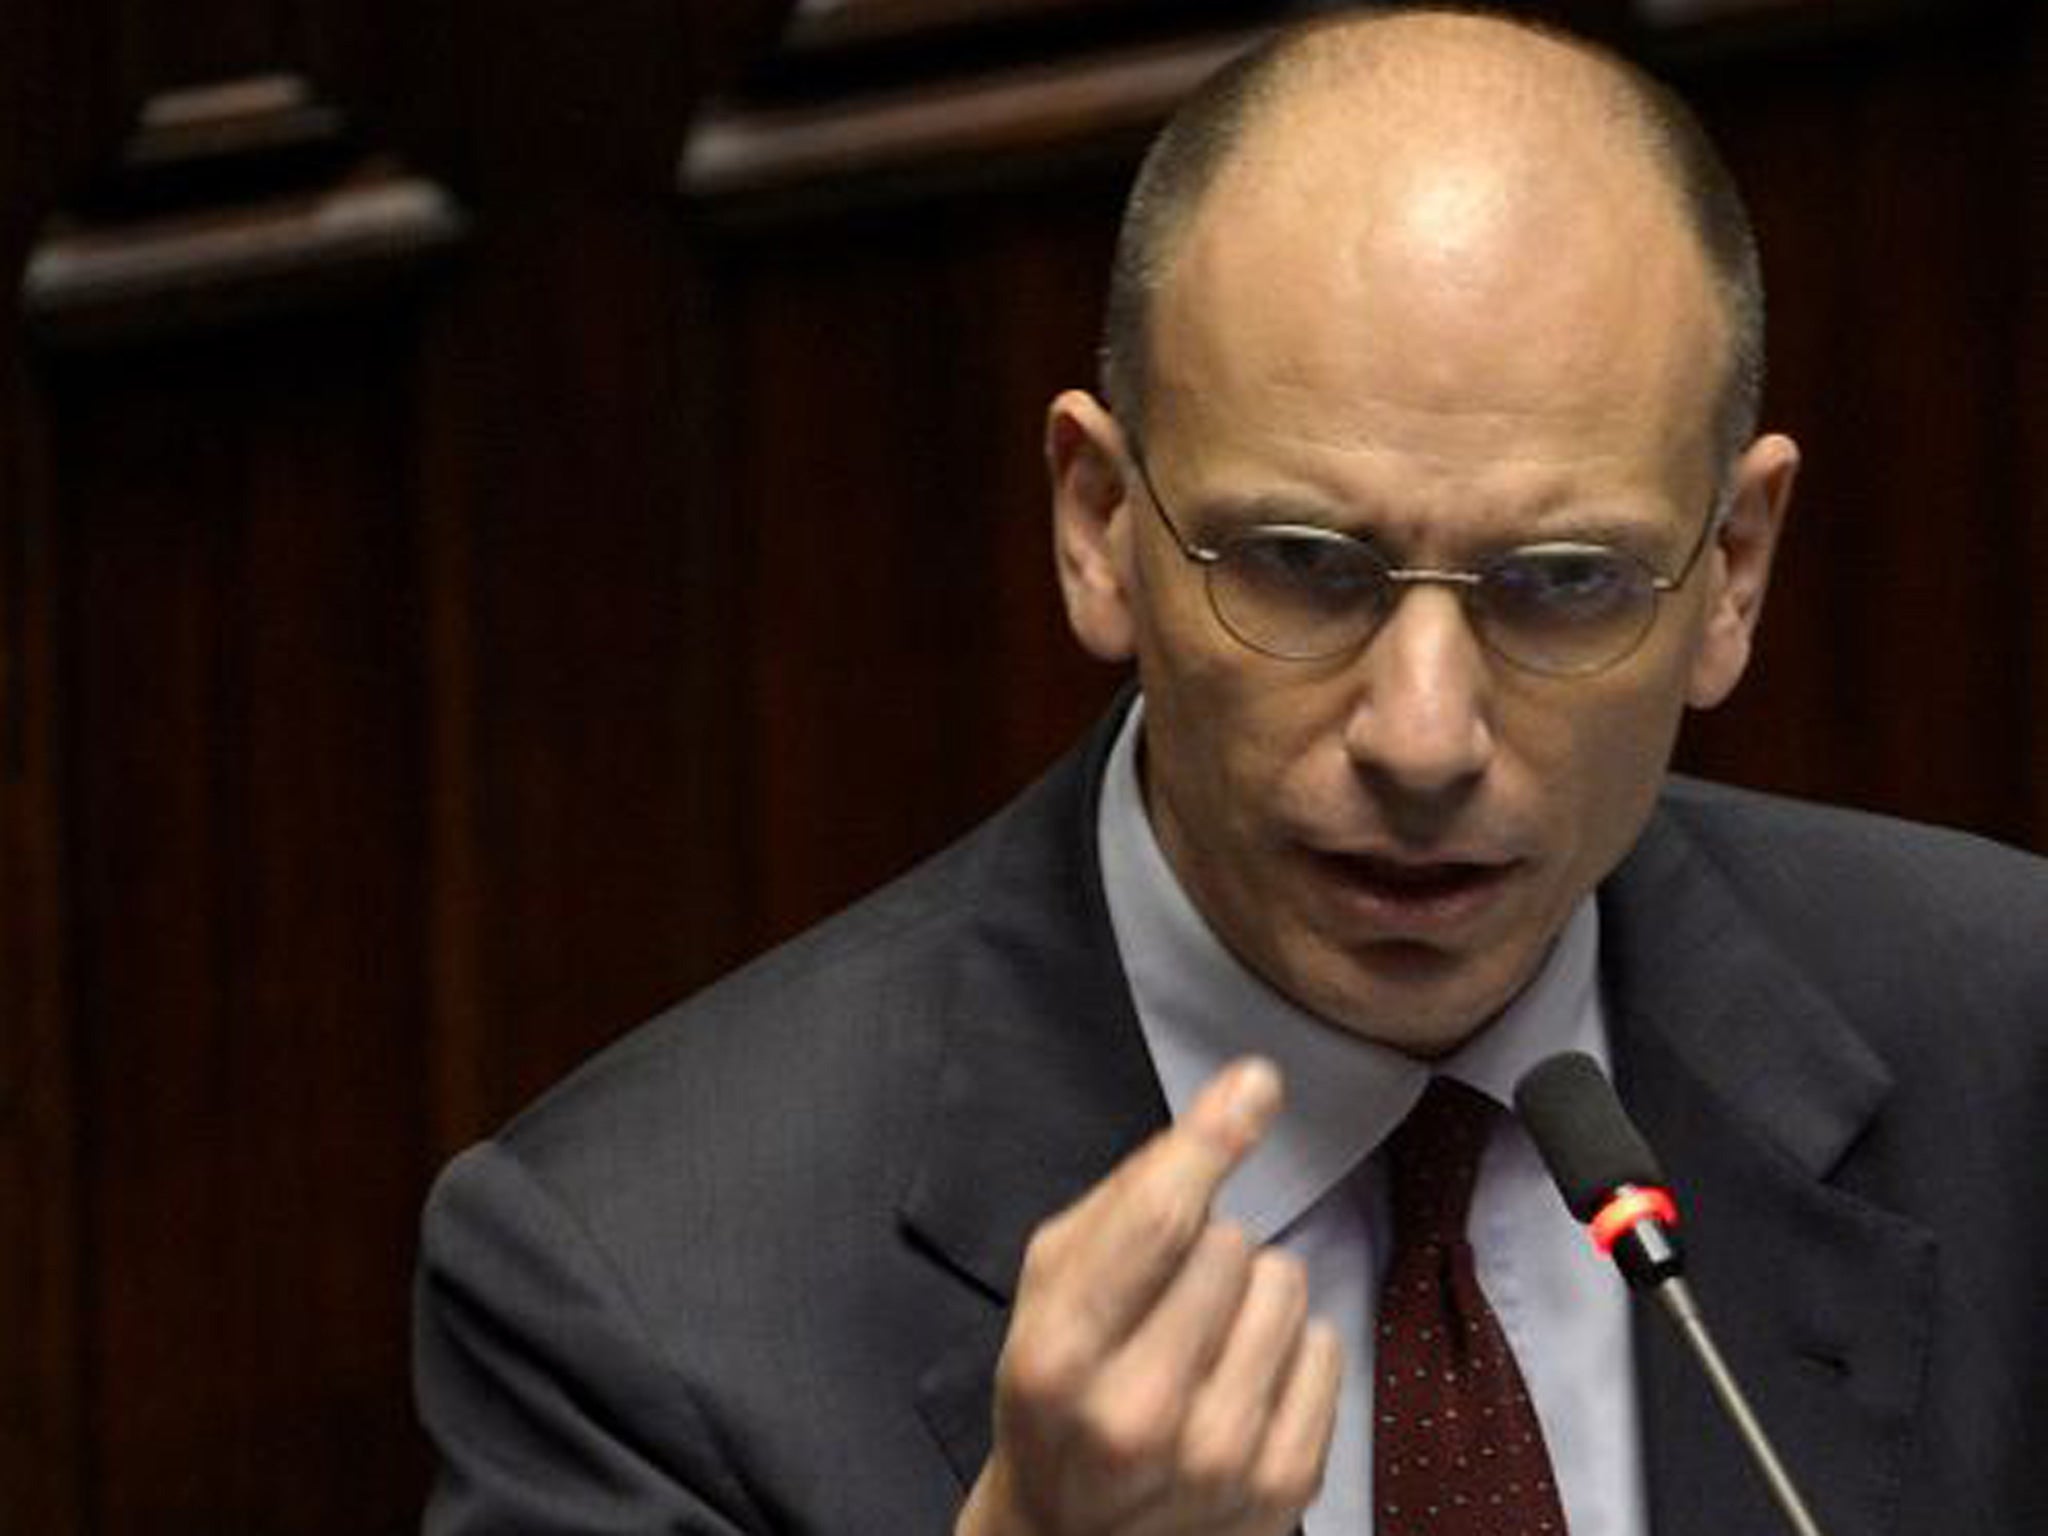 Enrico Letta has said his coalition will ease up on austerity in order to drag the pivotal eurozone economy out of its downward spiral